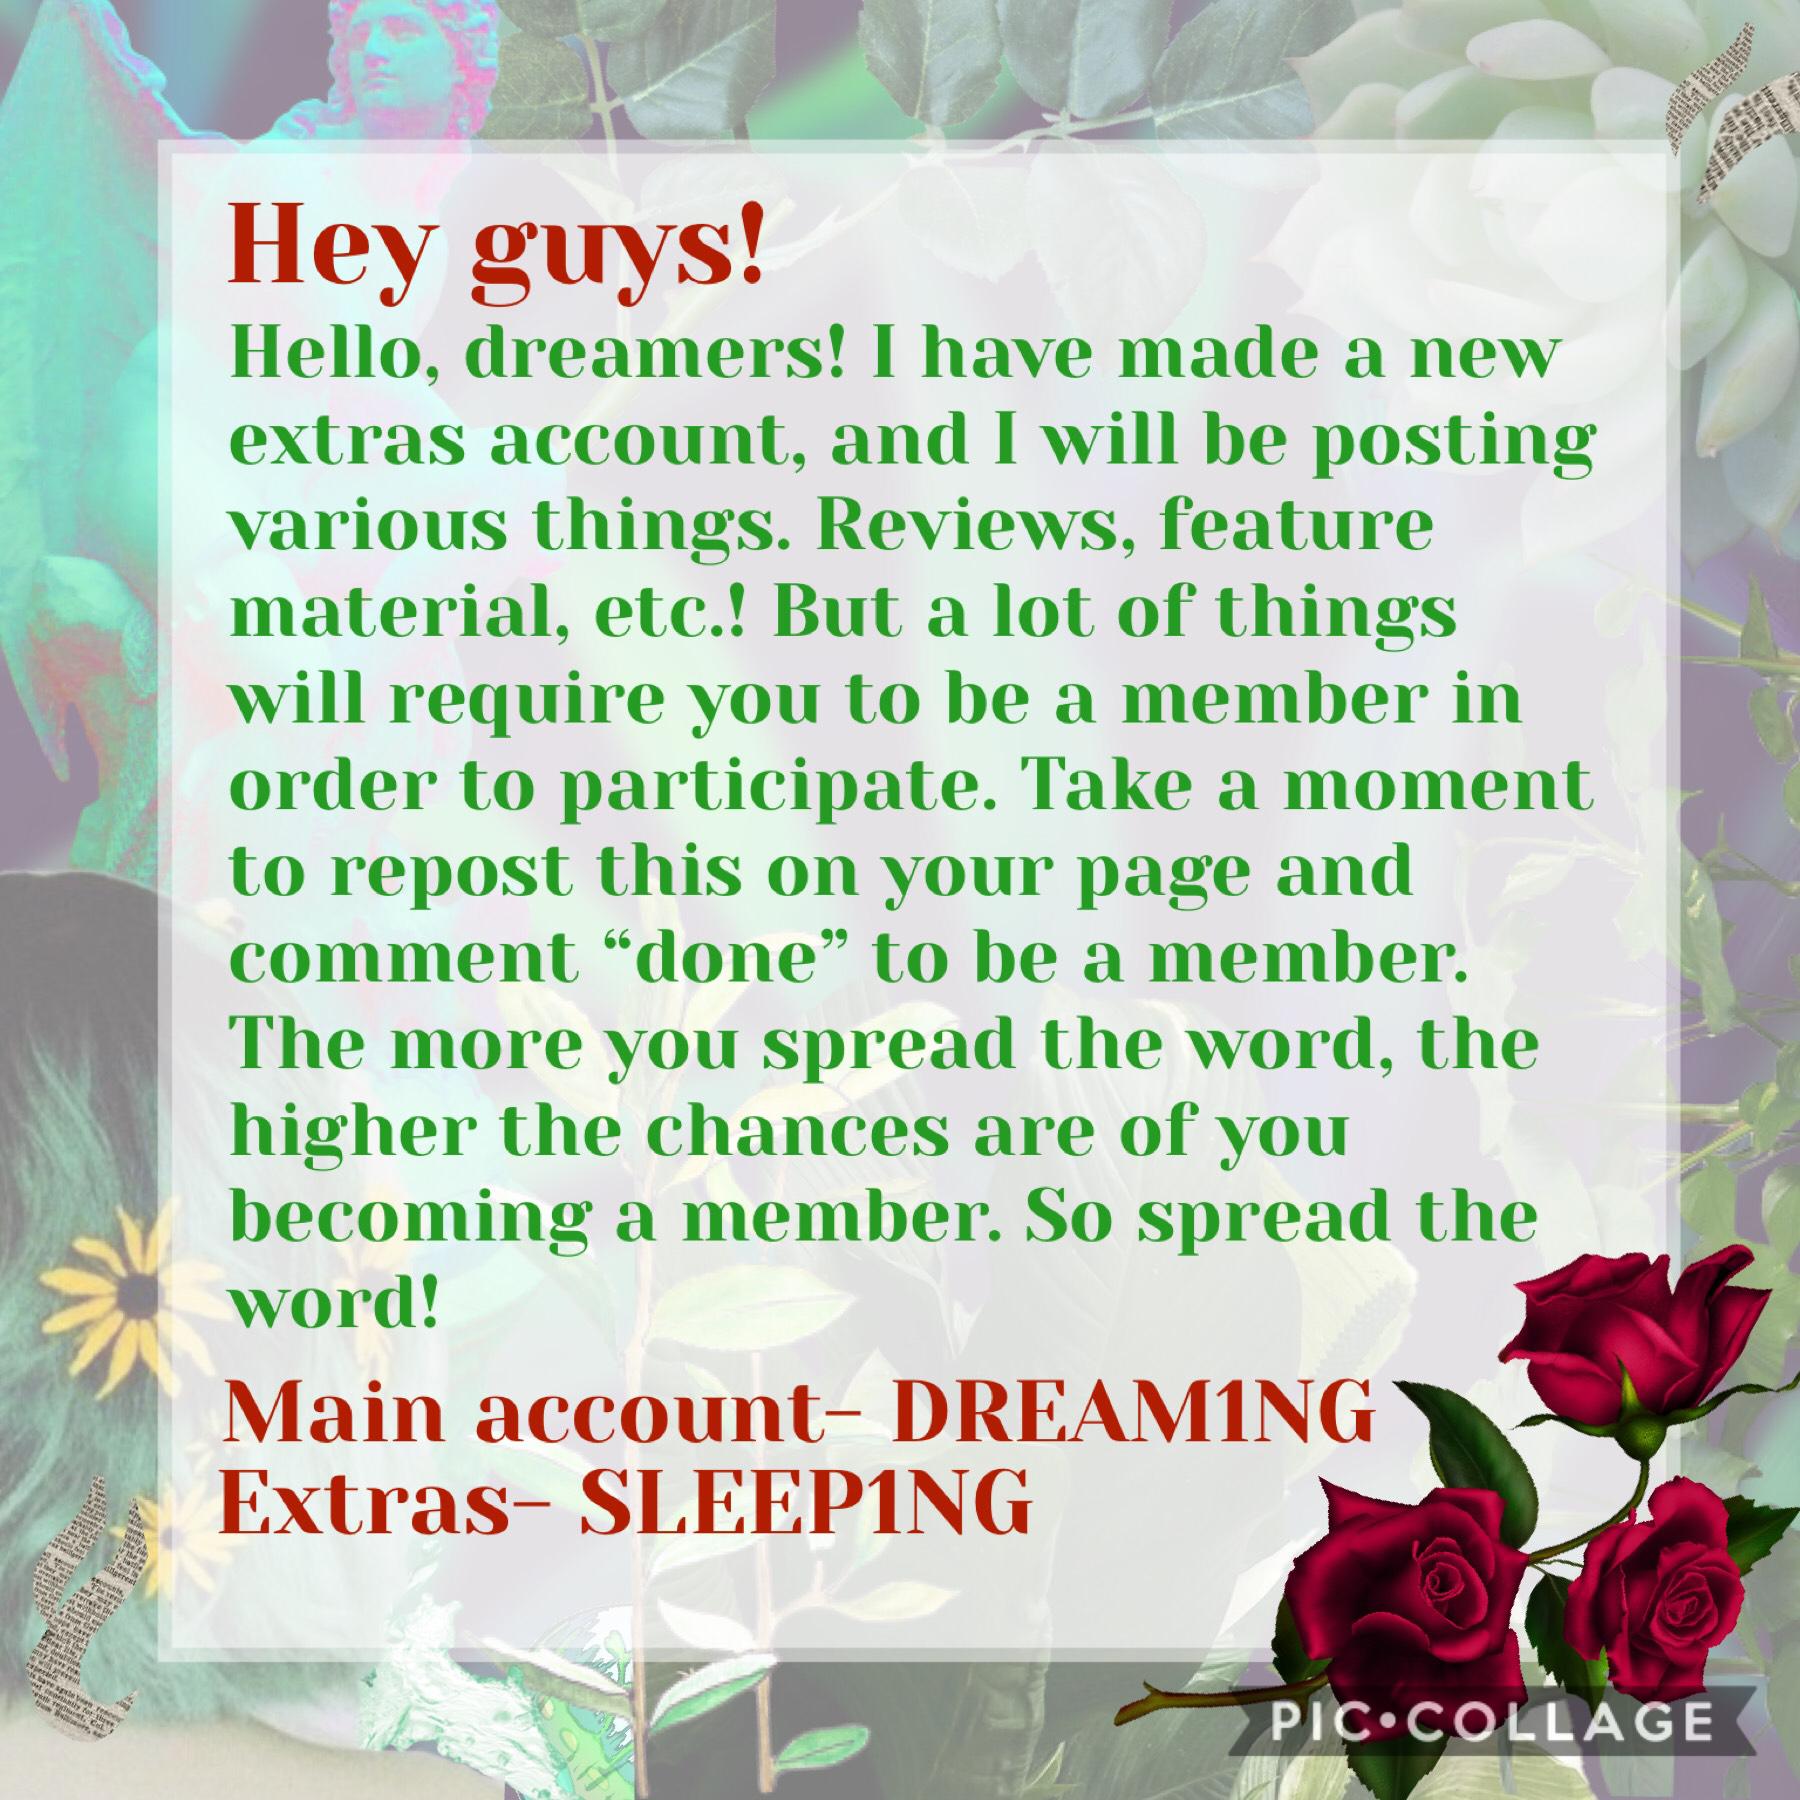 Hey! Extras account info!! Clickkkkkyyyyyyy
Along with “done”, it would also be helpful if you told me where you got the information about the account from. For example, if you saw this on my page, tell me “done, DREAM1NG”, but if you saw it on someone el